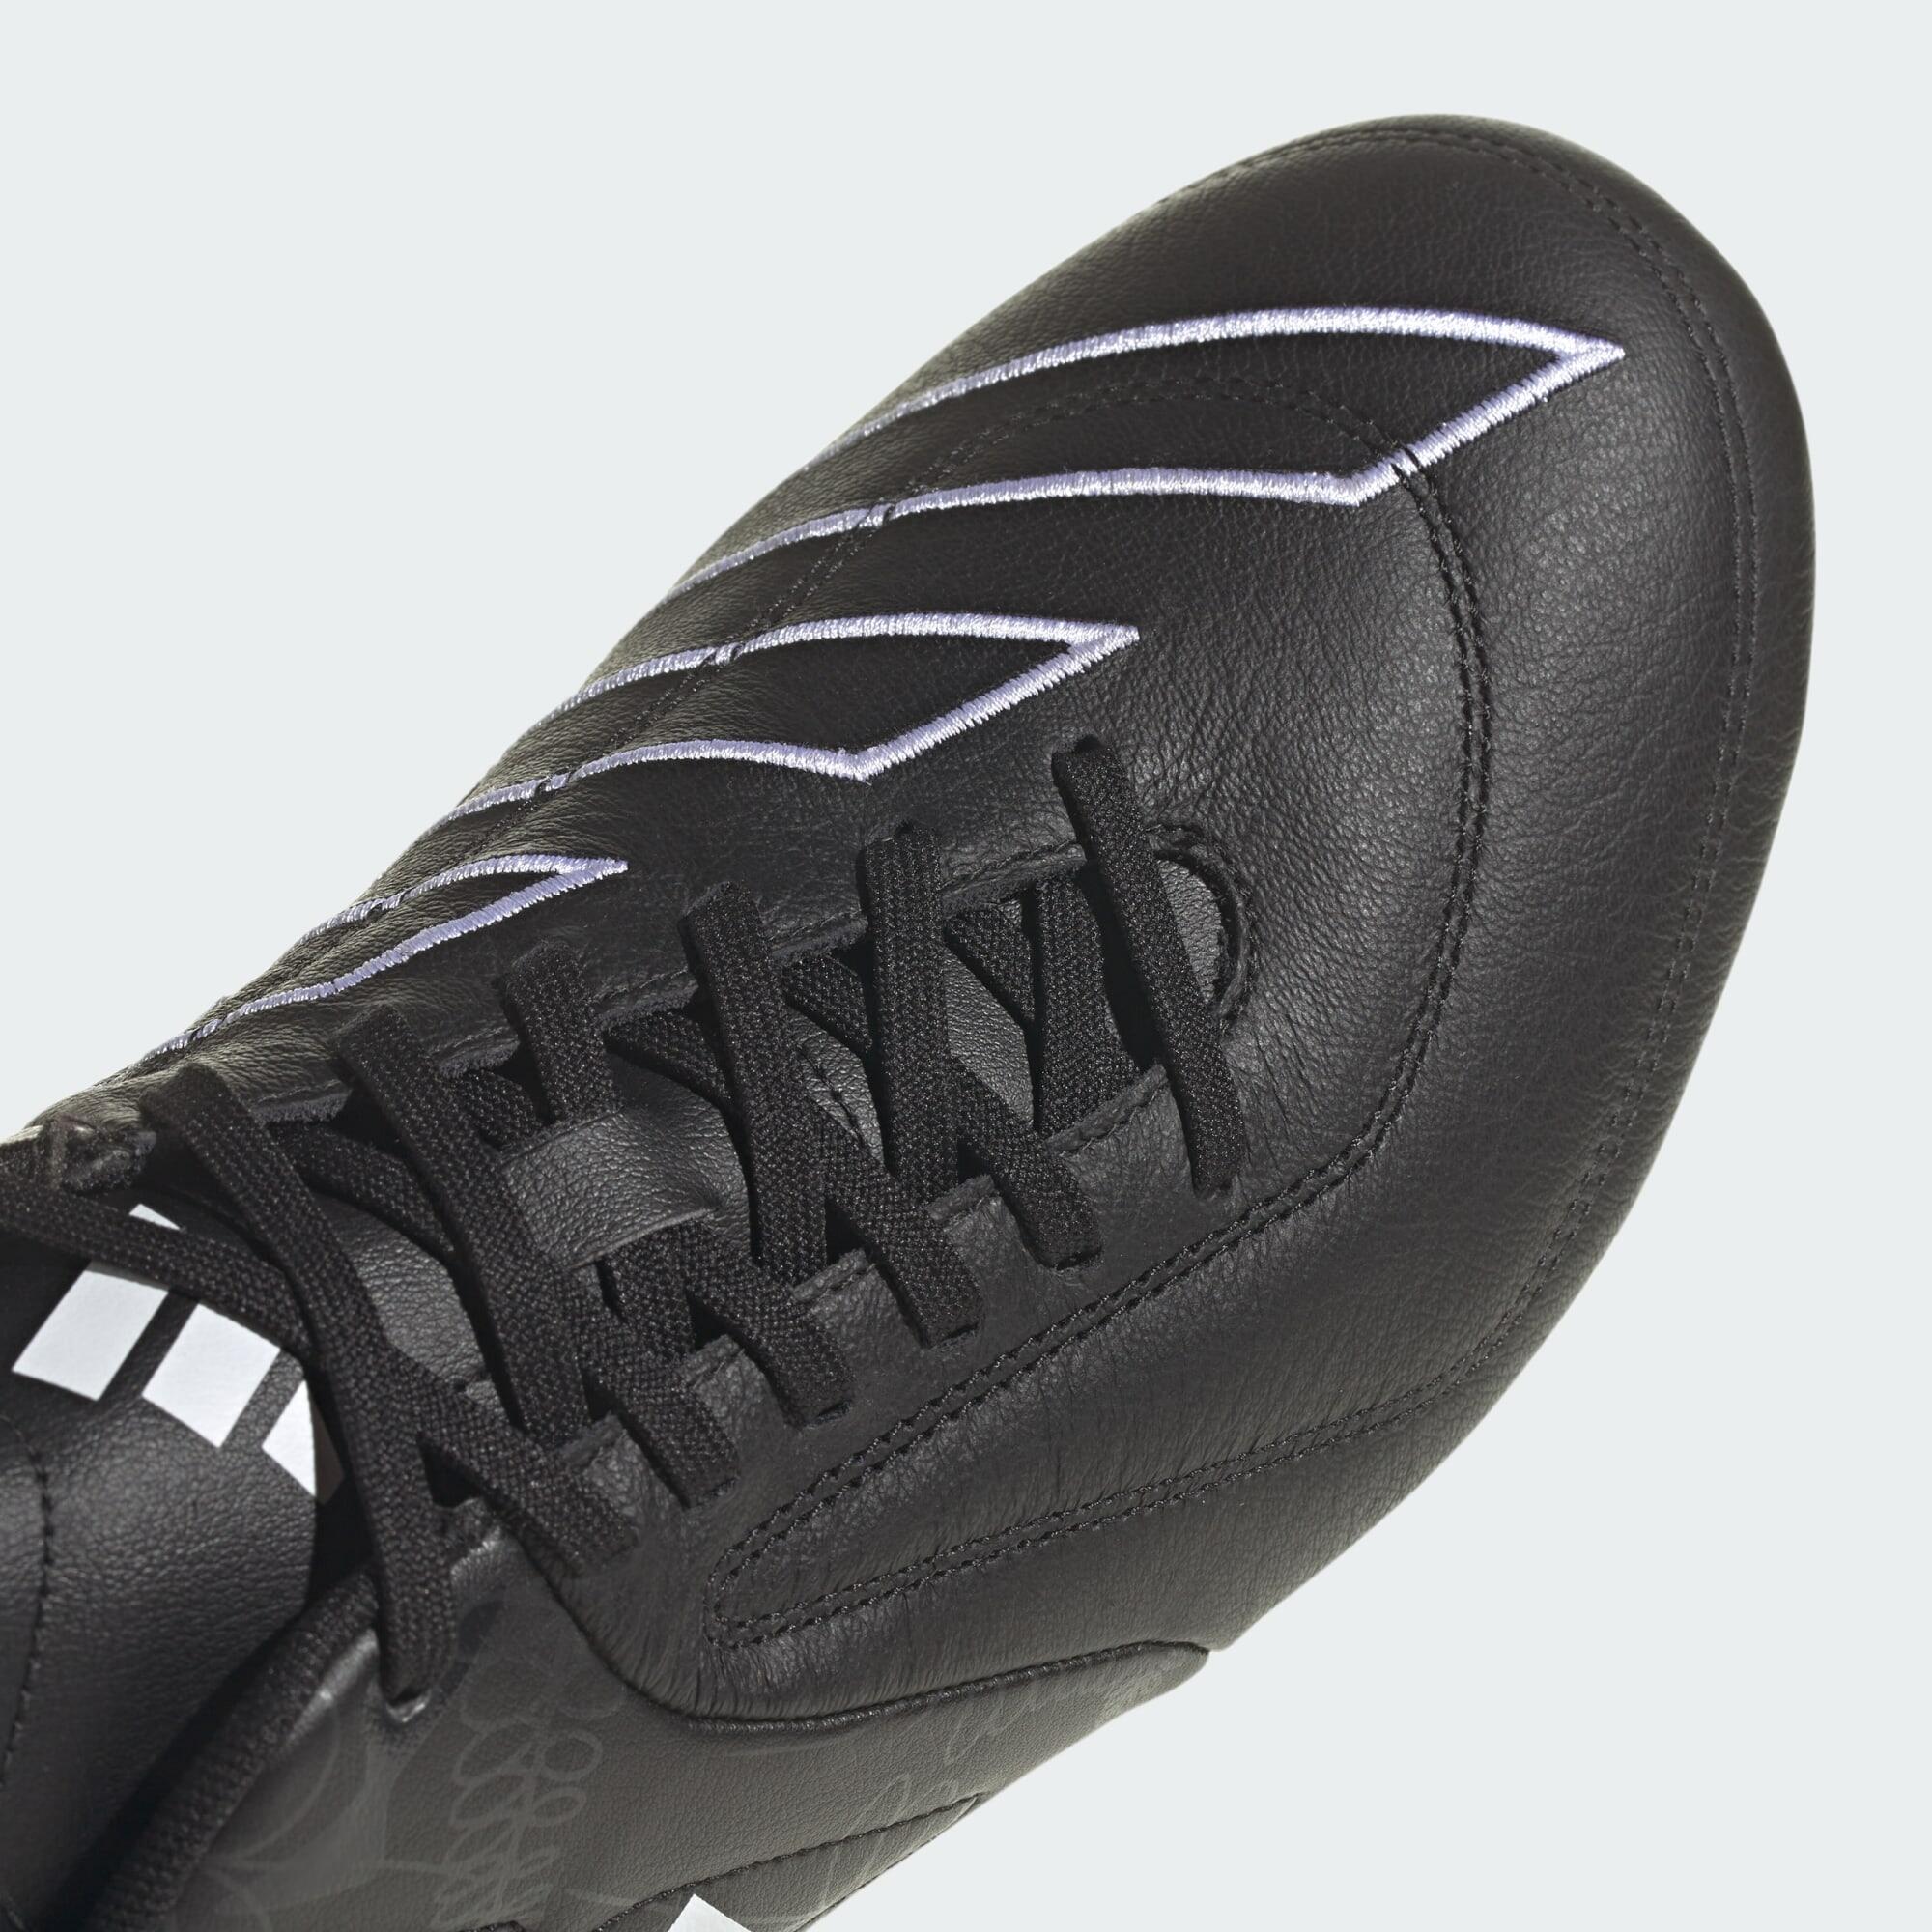 RS15 Elite Soft Ground Rugby Boots 7/7